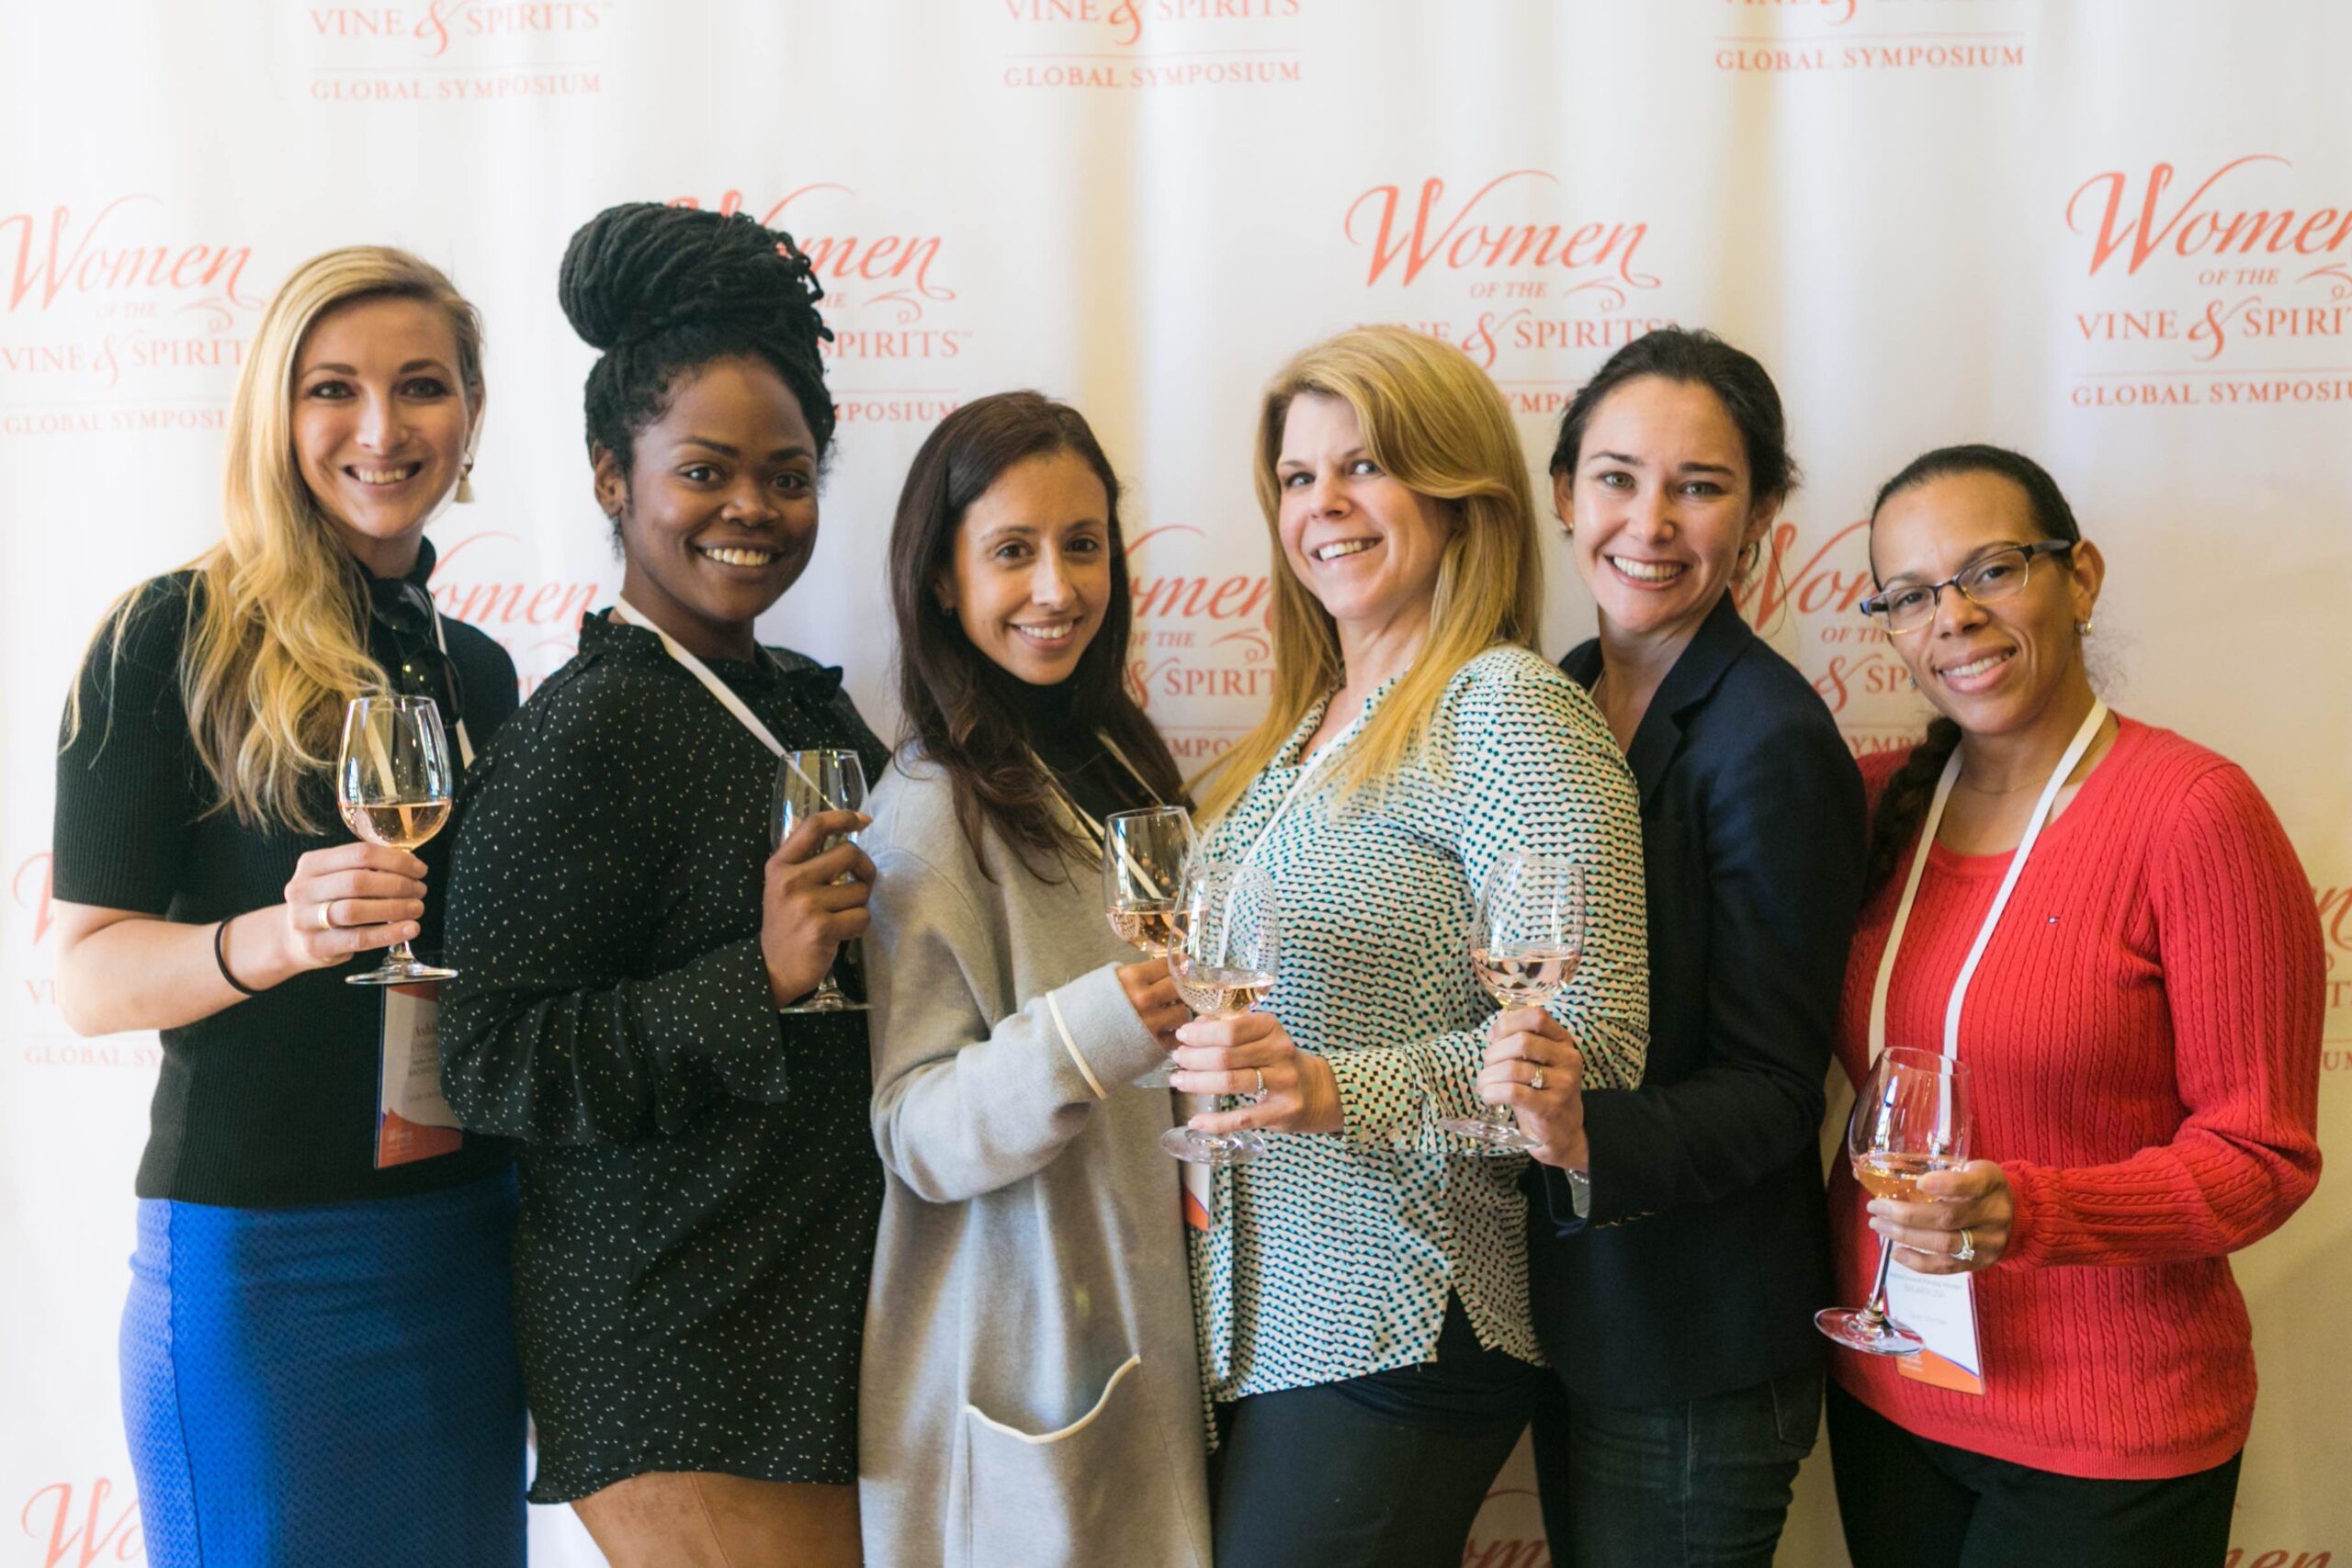 How Women of the Vine & Spirits is acting on diversity & inclusion